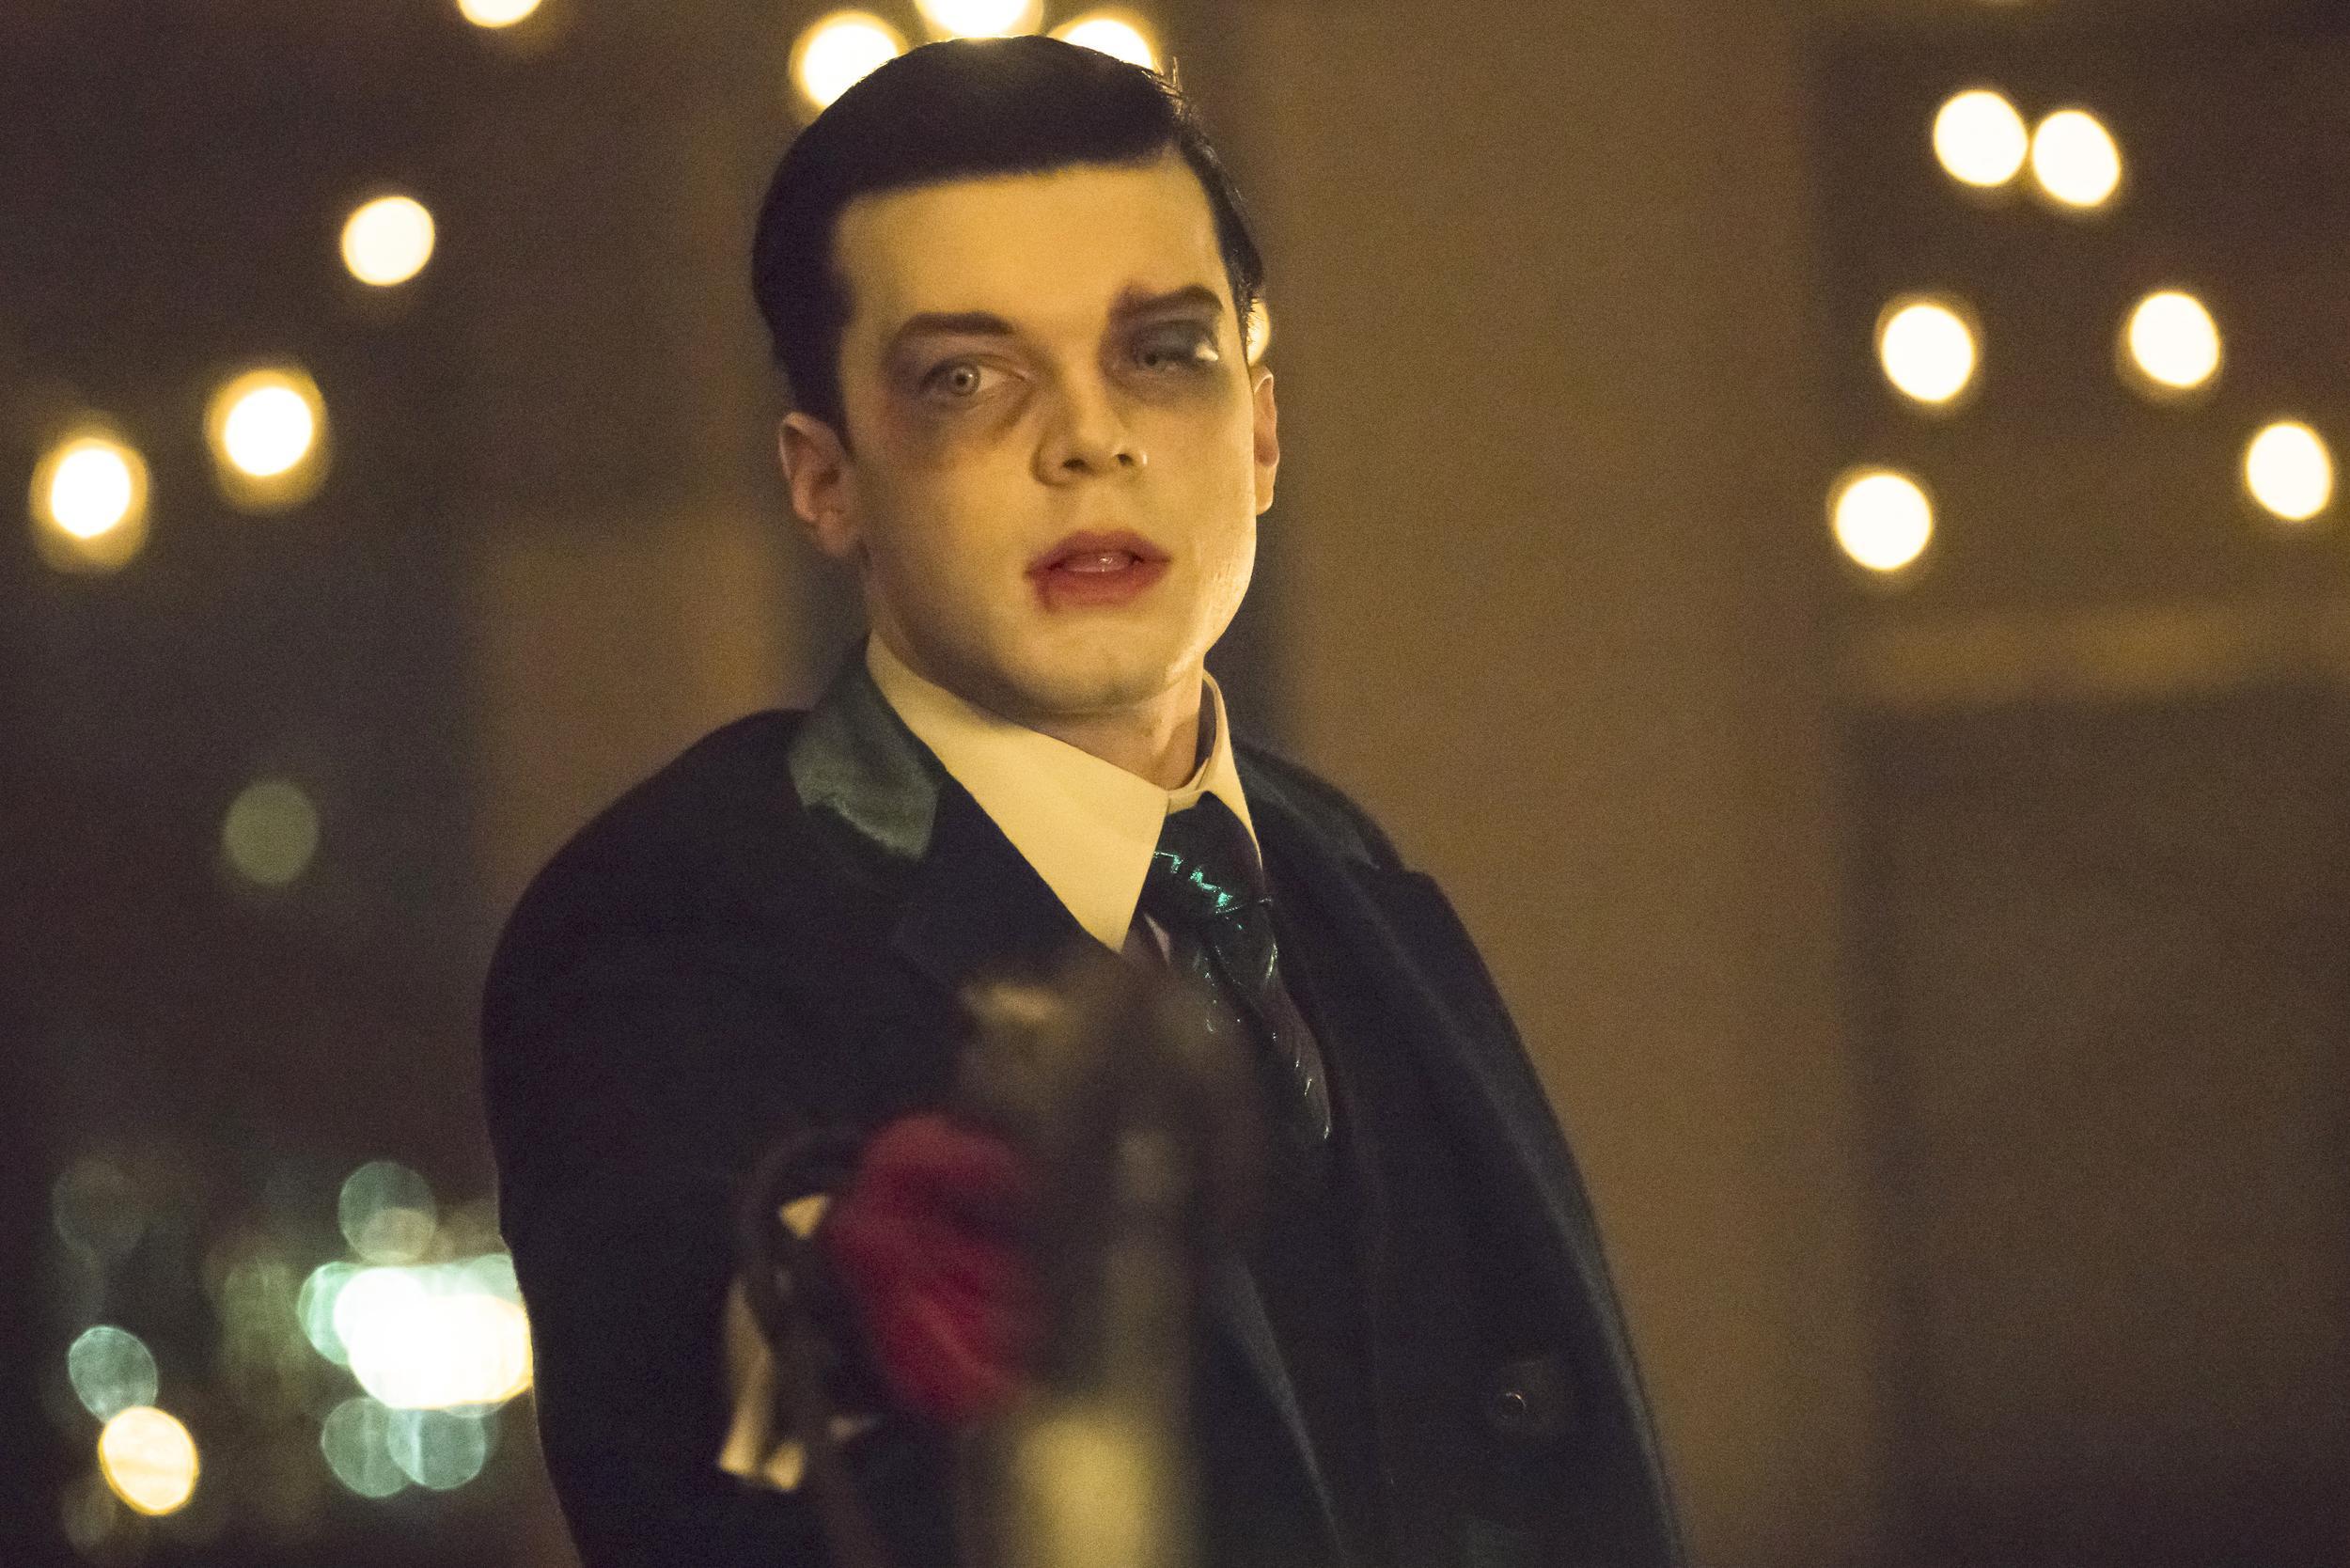 Clues That Jeremiah Is The Joker On 'Gotham' Point To